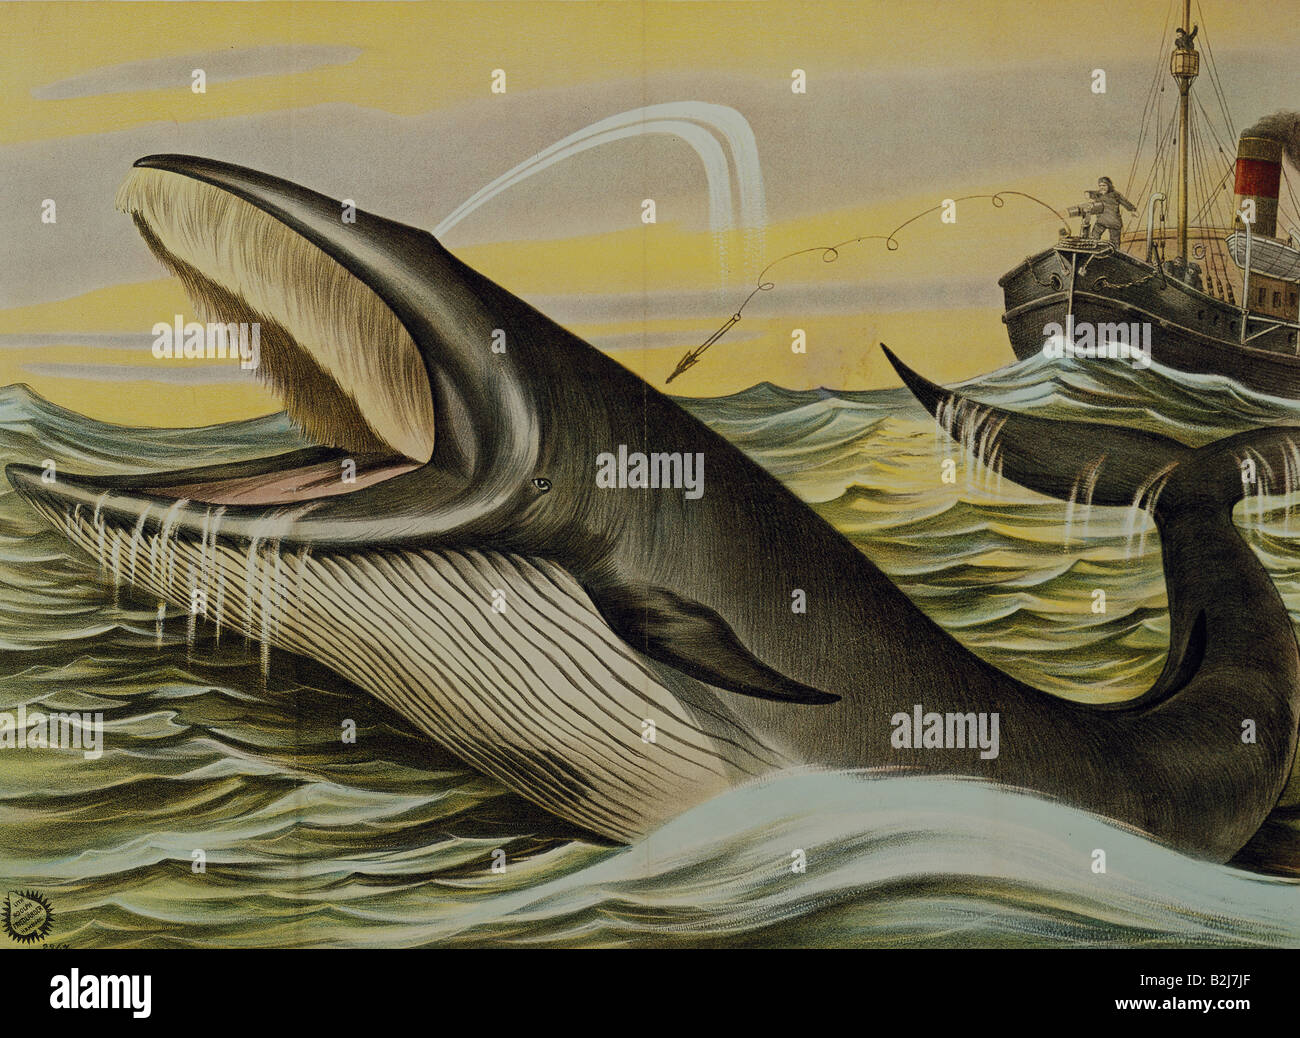 fishing, whaling, poster for the exhibition of a whale, lithograph, printed by Adolph Friedlaeder, Hamburg, 1896, Deutsches Plakatmuseum, Museem Folkwang, Essen, Stock Photo